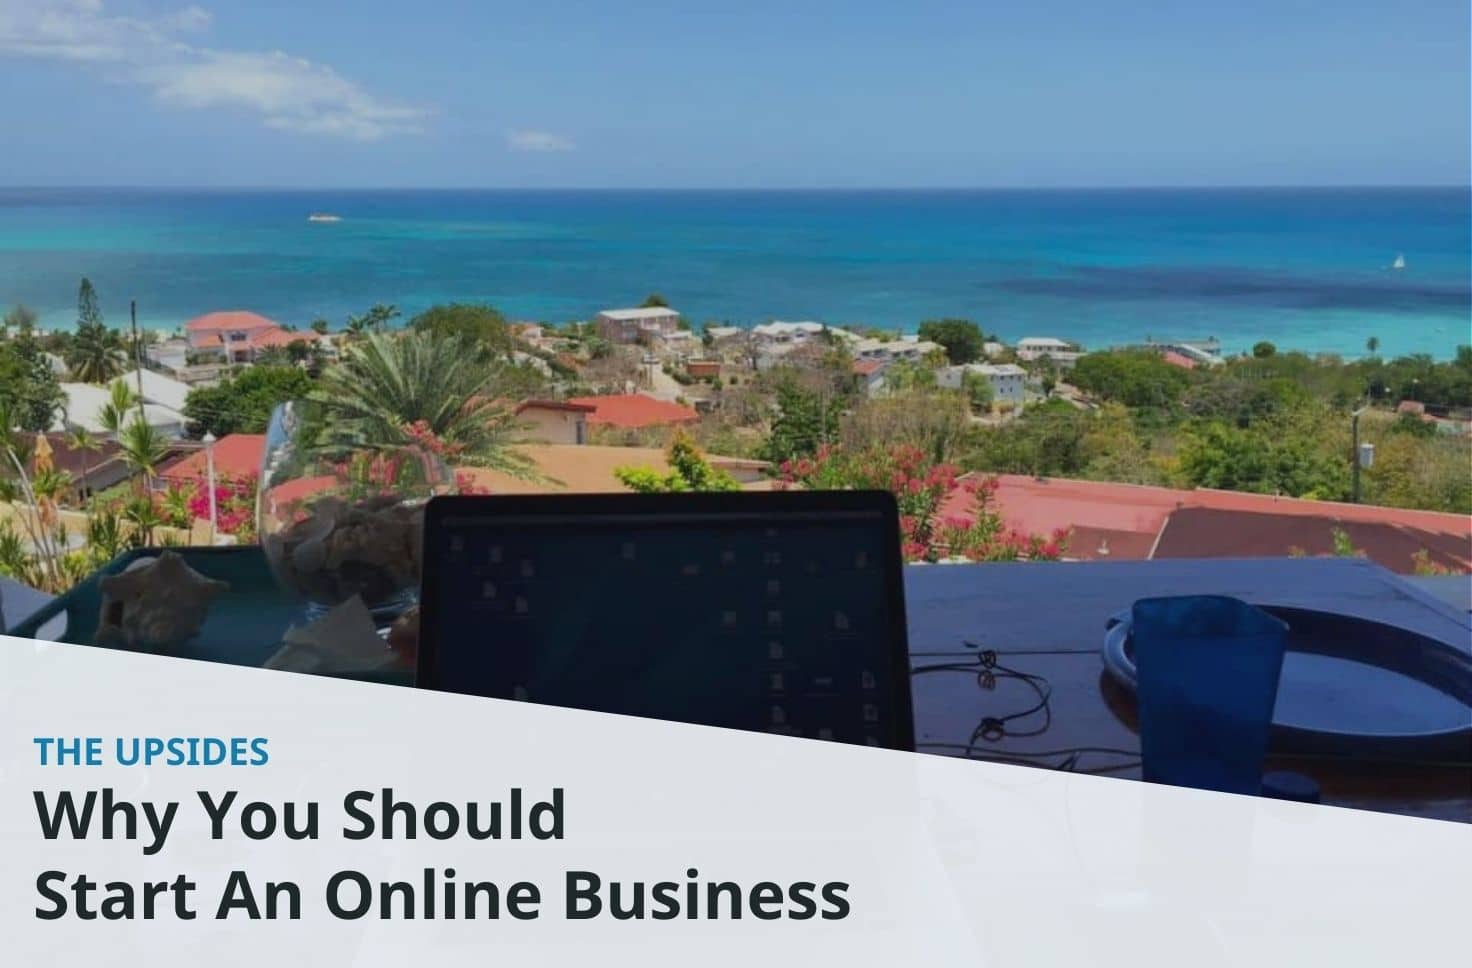 10 Reasons Why You Should Consider Starting An Online Business